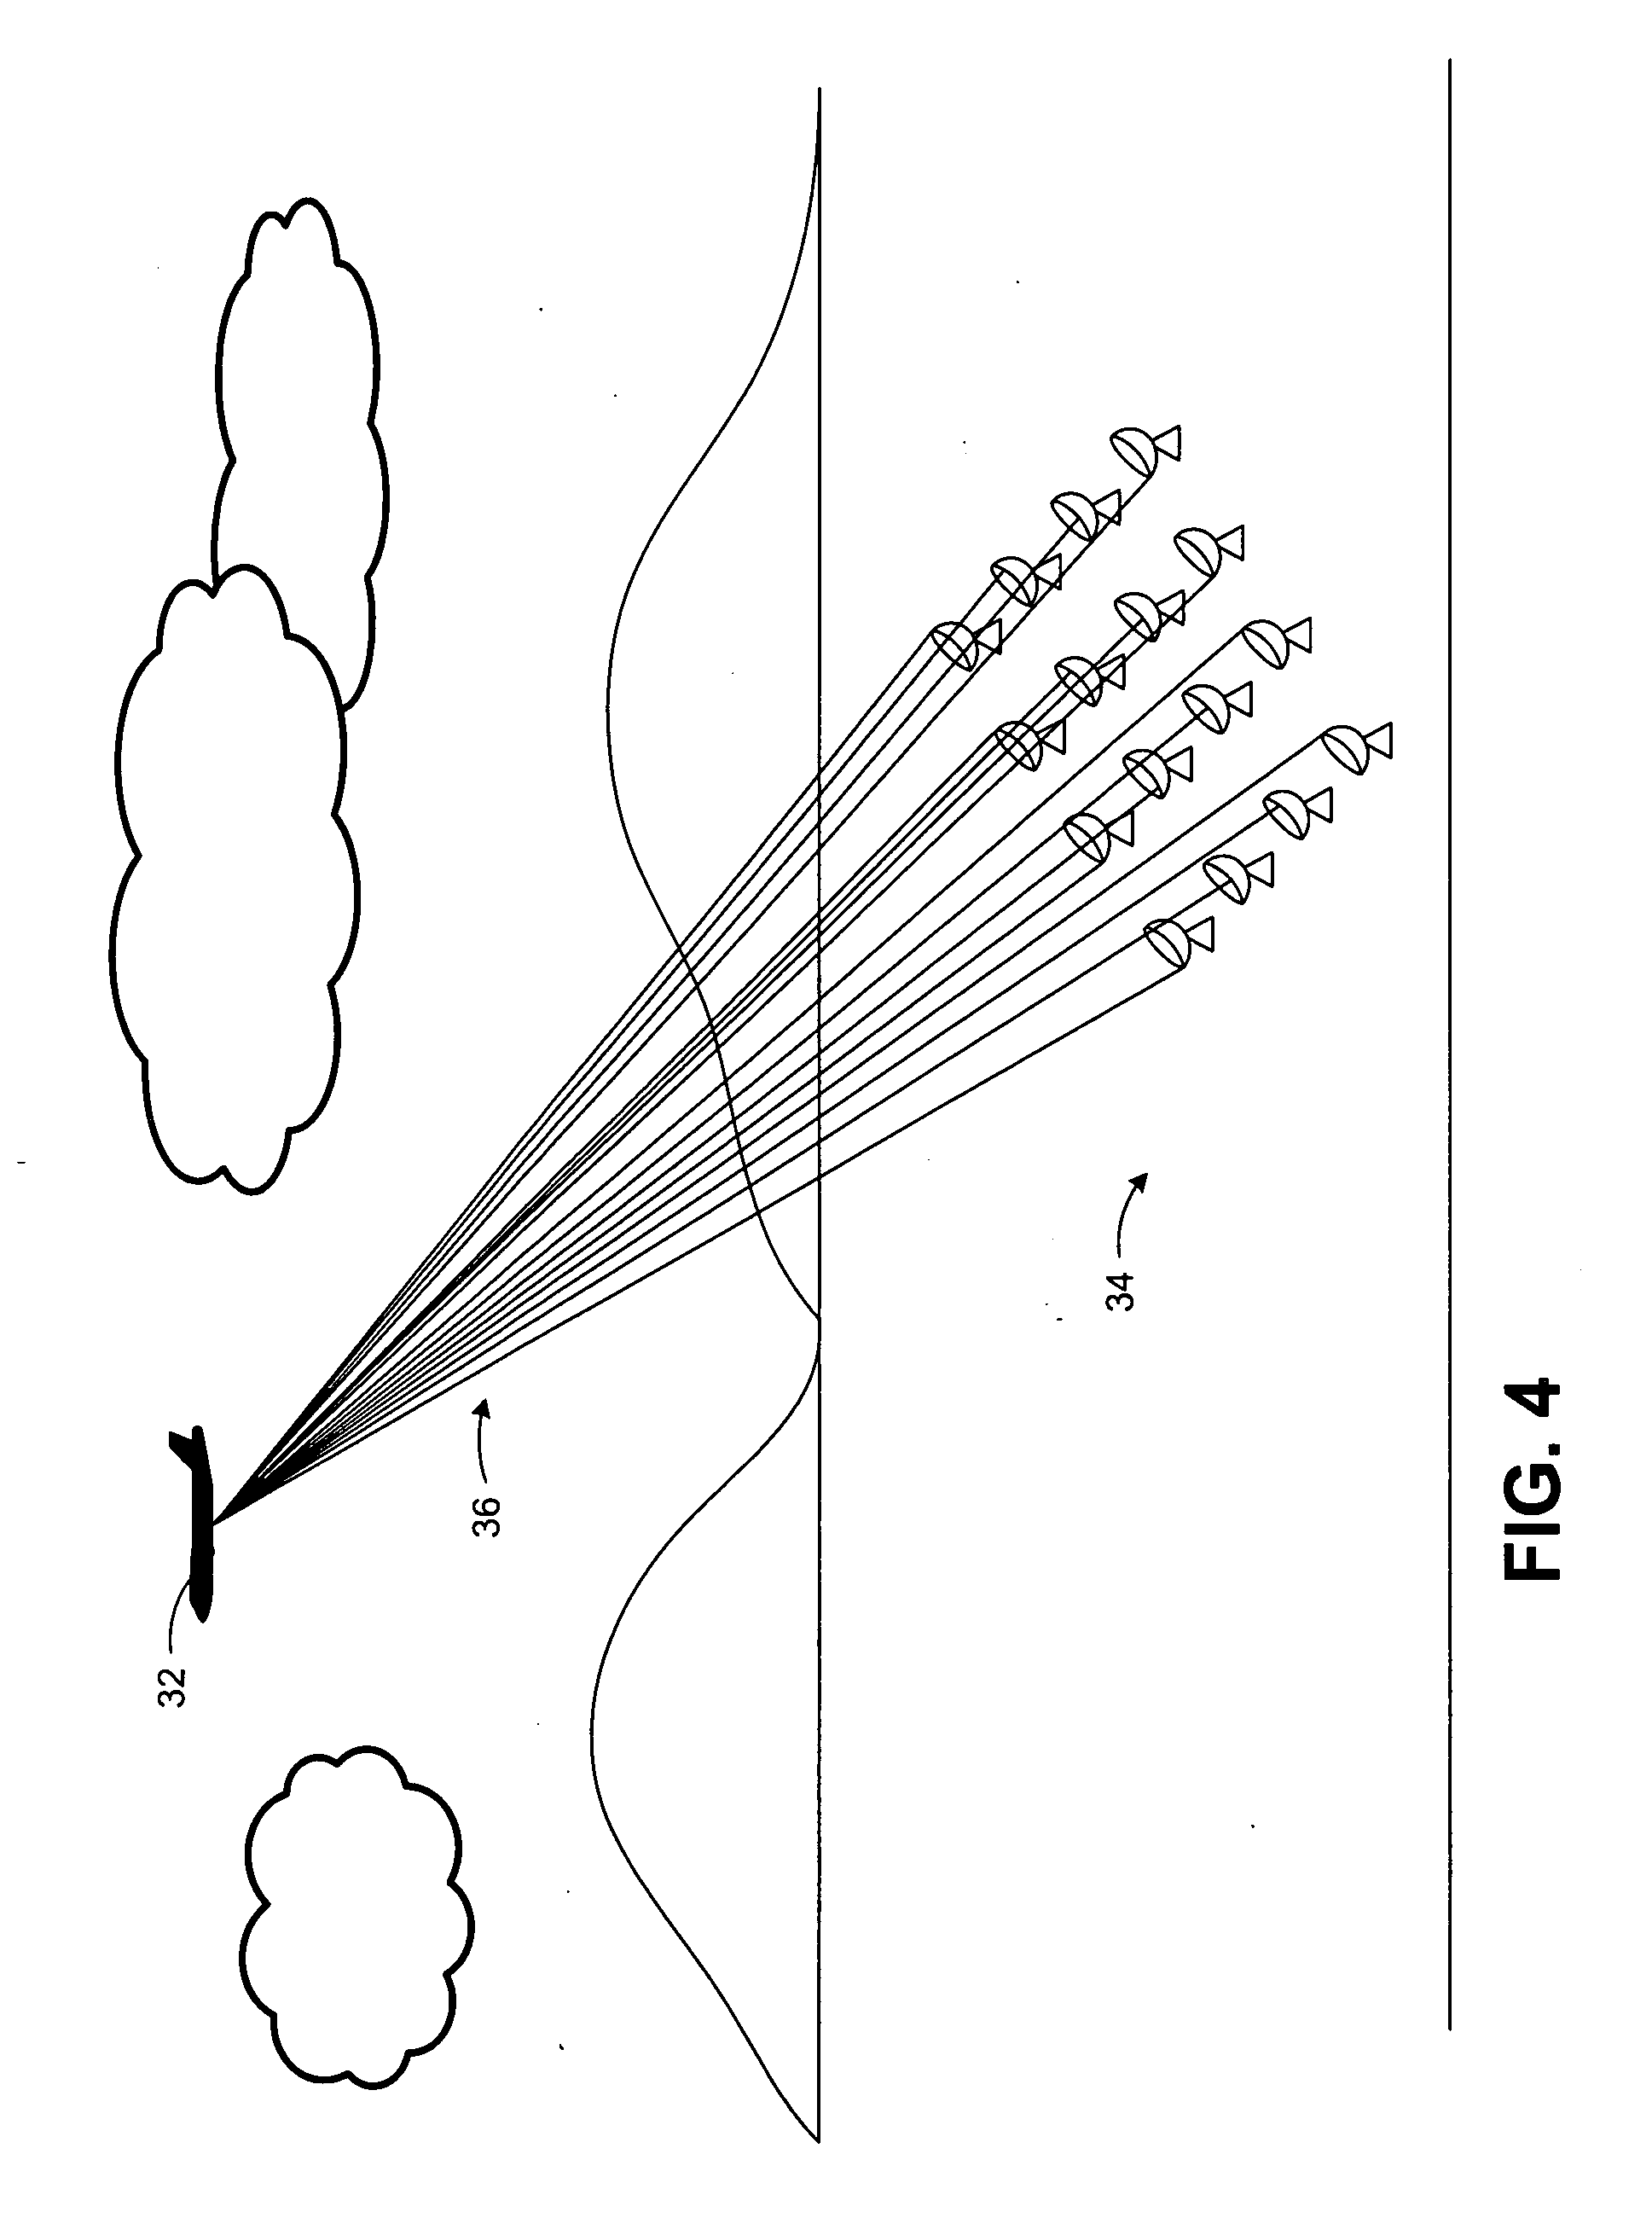 Wireless power transmission system and method